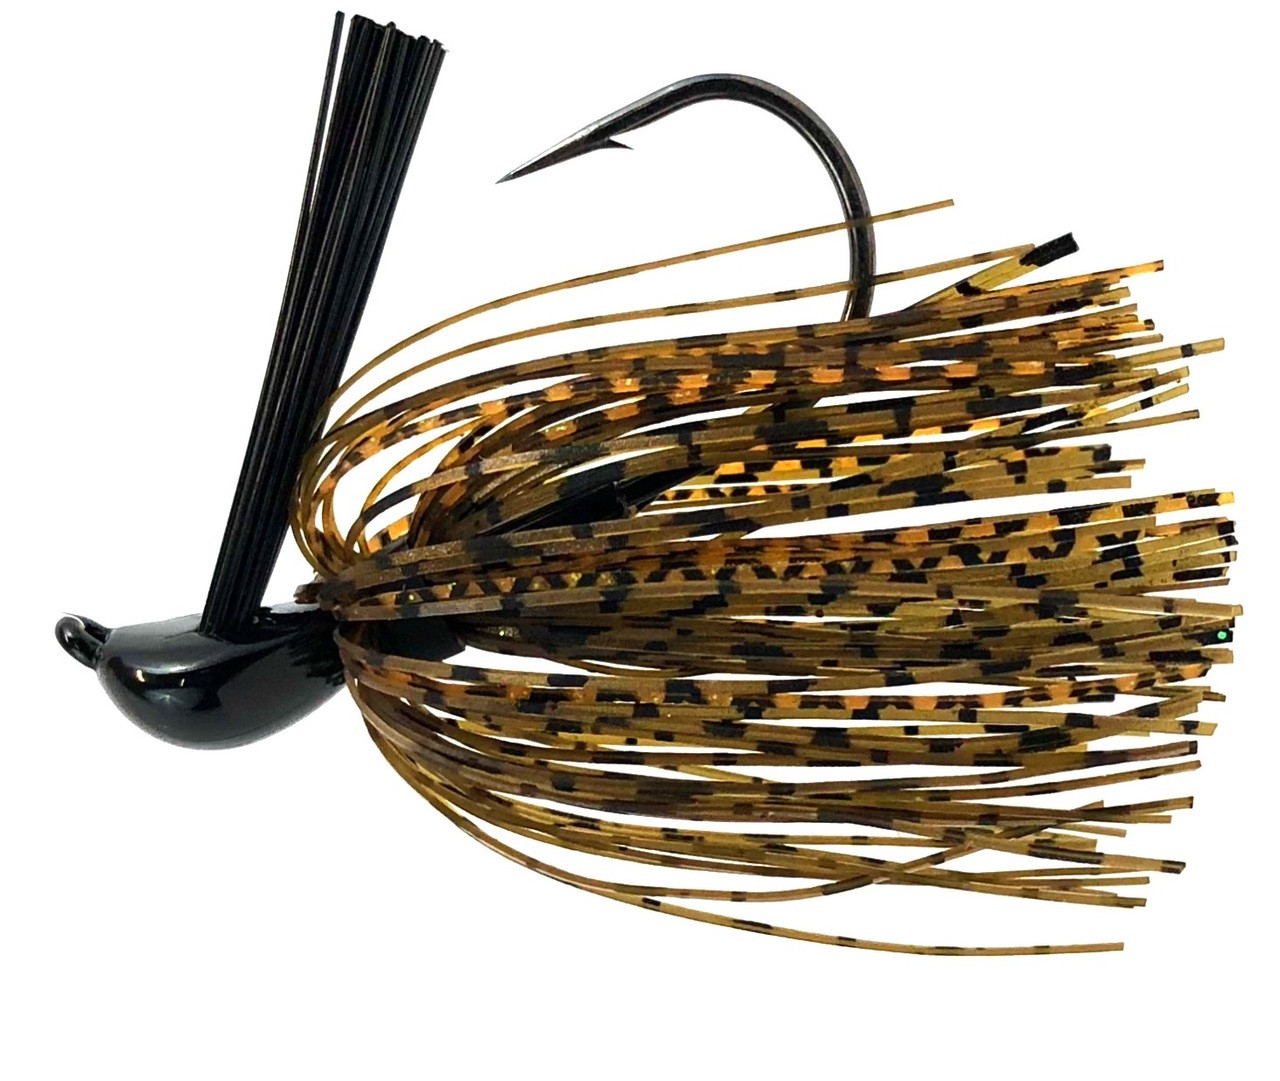 Reaction Tackle Tungsten Scrounger Jig Head for Bass Fishing - Premium  Tungsten Fishing Jigs - Ideal Fishing Bait for Smallmouth and Largemouth  Bass